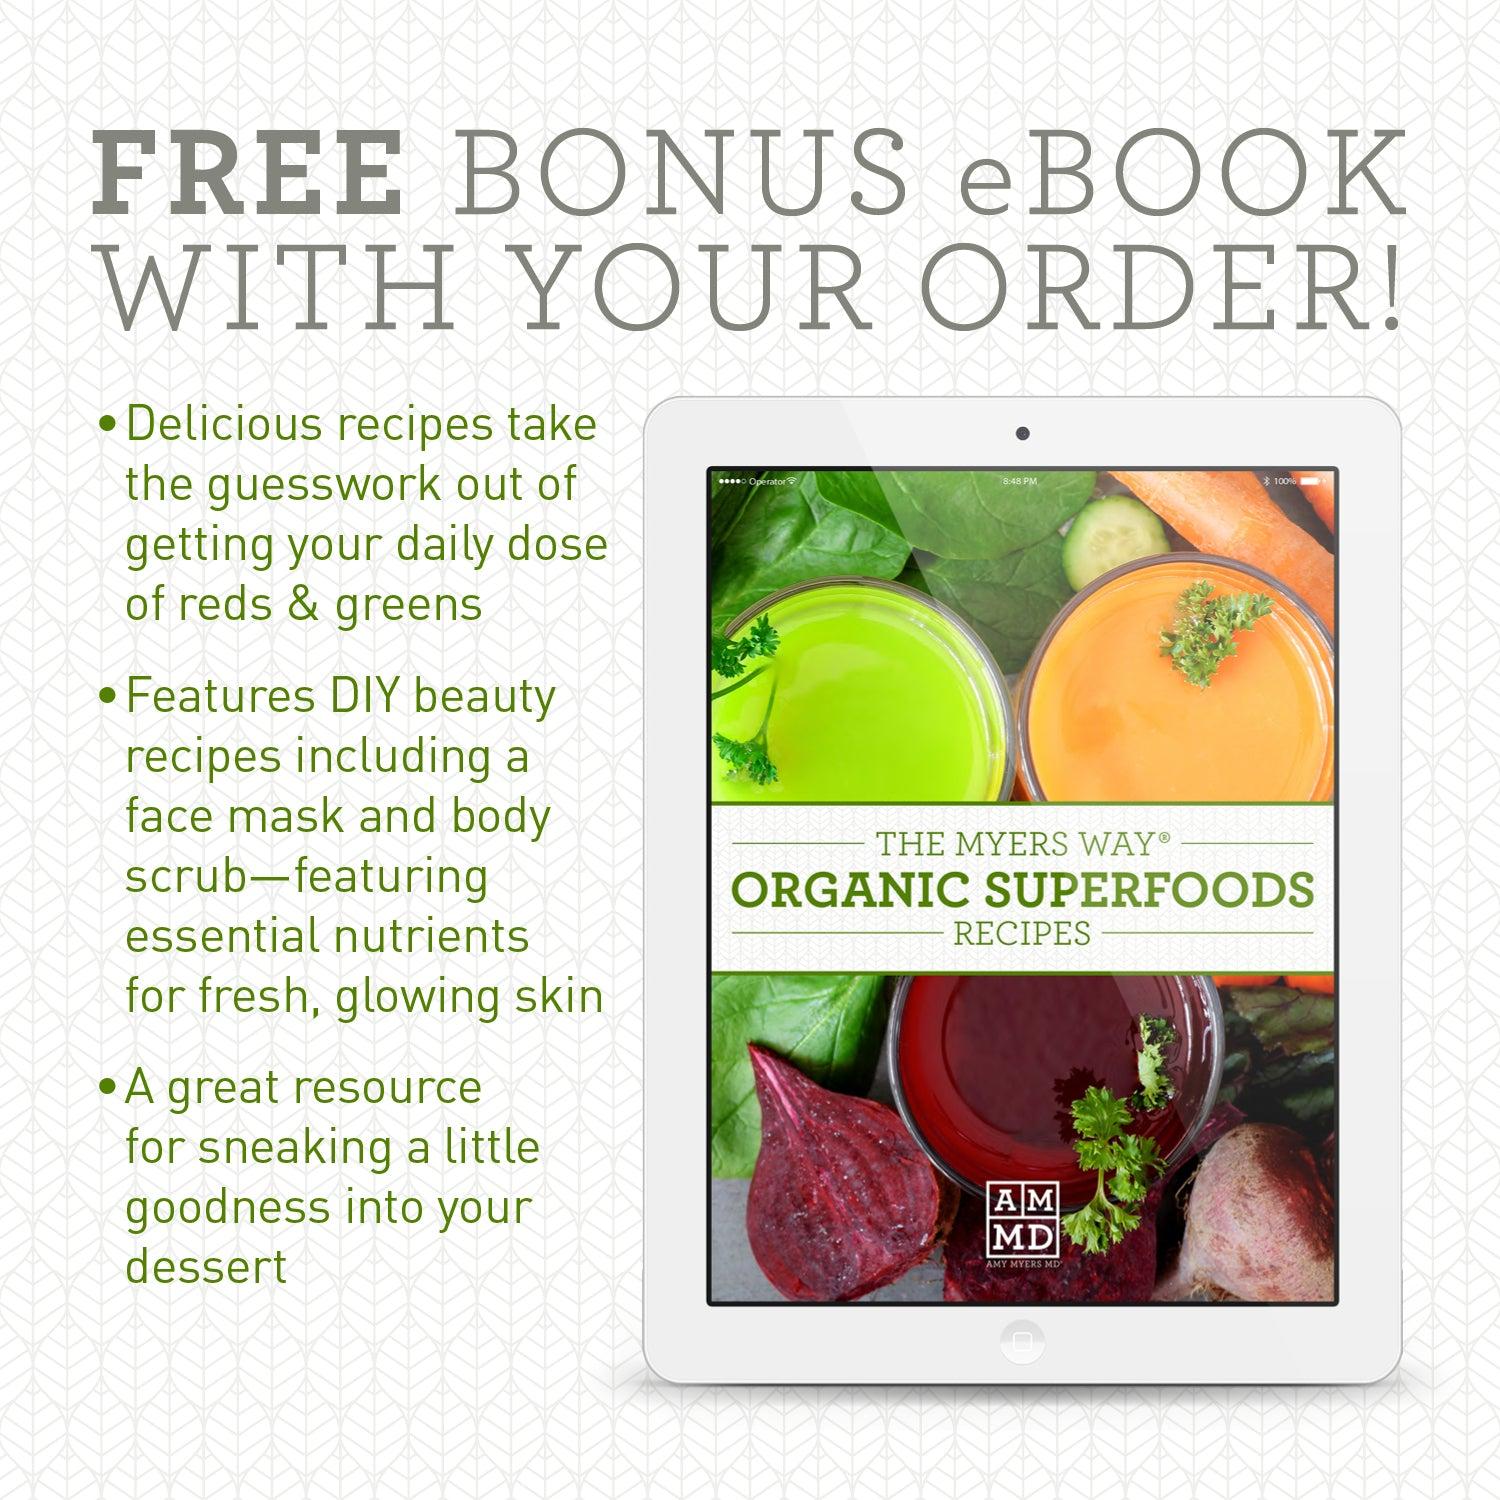 FREE BONUS EBOOK WITH YOUR ORDER! Delicious recipes take the guesswork out of getting your daily dose of reds & greens. Features DIY beauty recipes including face mask and body scrub-featuring essential nutrients for fresh, glowing skin. A great resource for sneaking a little goodness into your dessert. Picture of a tablet device featuring the cover image of The Myers Way® Organic Superfoods Recipes eBook. 